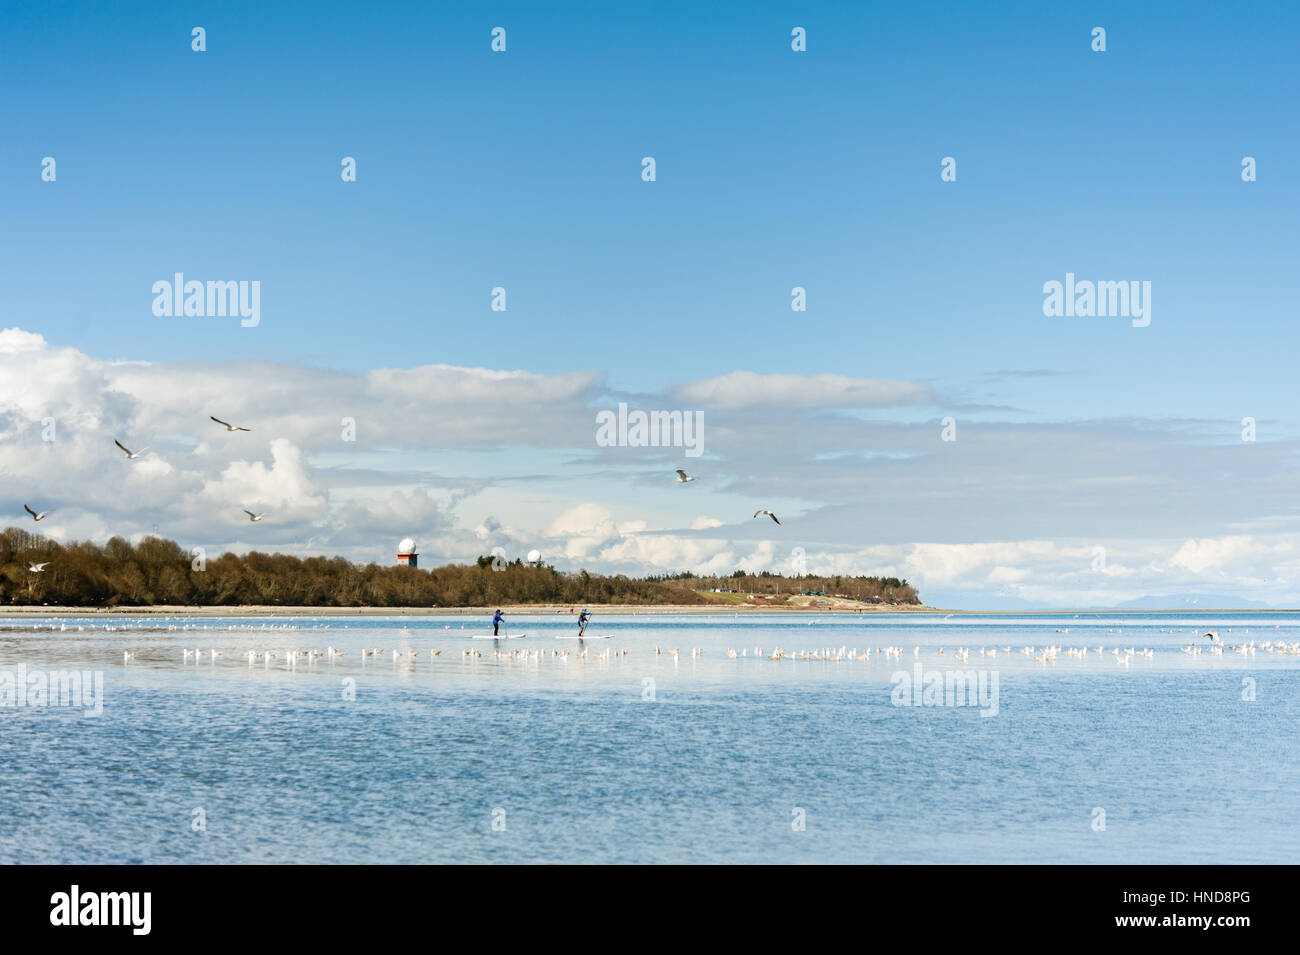 Stand Up Paddleboarders paddle SUP in the ocean with seagulls at Kye Bay, Comox, British Columbia, Canada Stock Photo